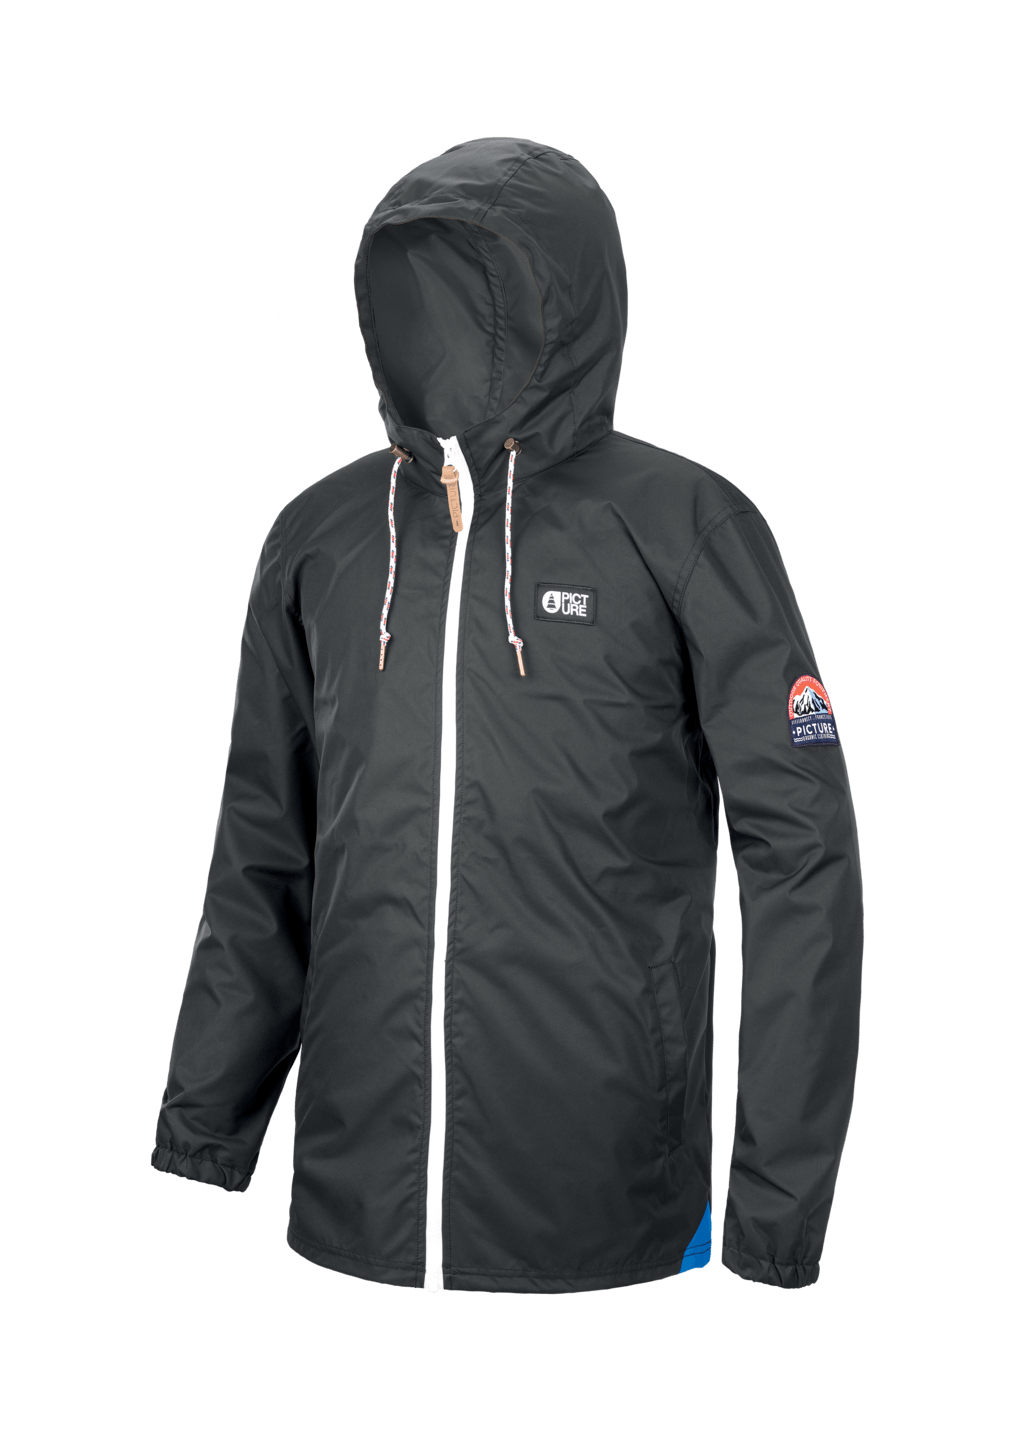 Picture Mens Hiking Jacket - Gerald